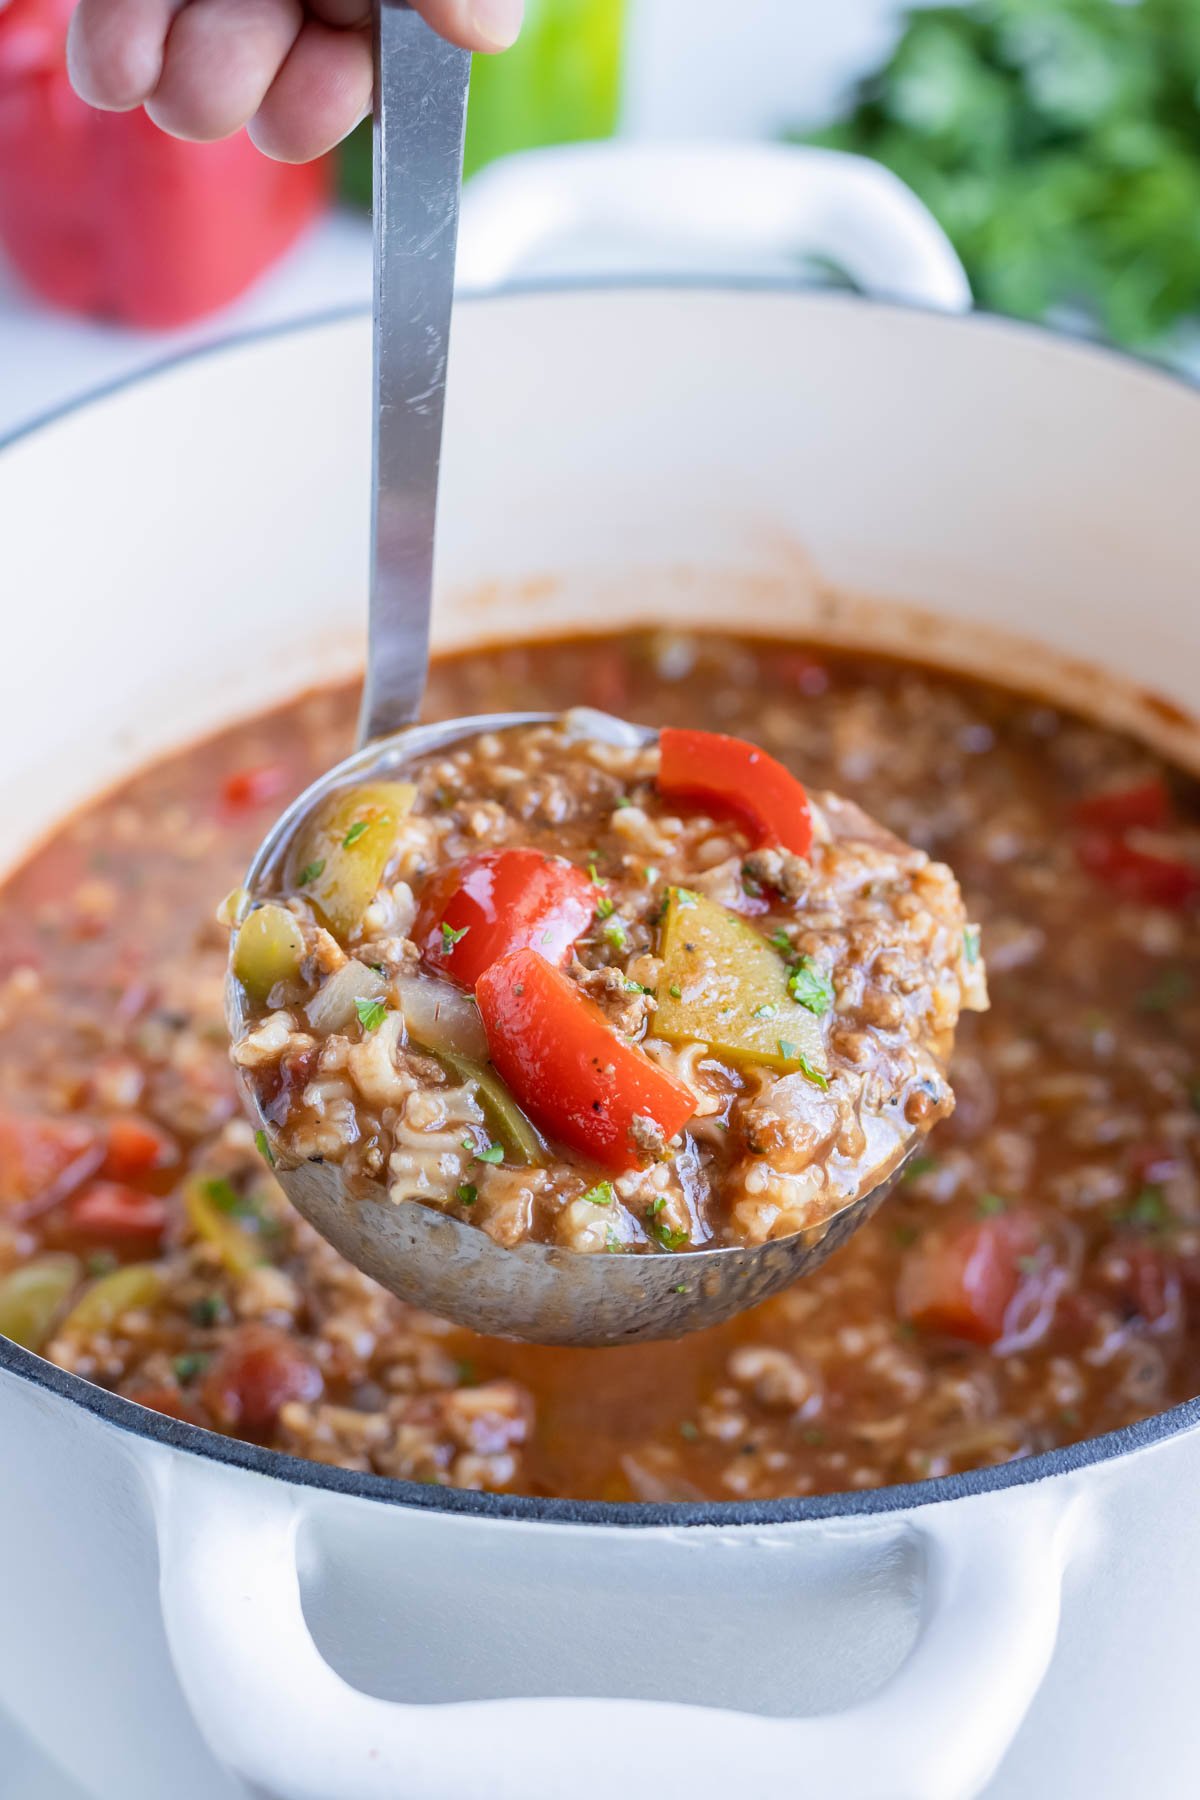 Stuffed pepper soup is served with a ladle.